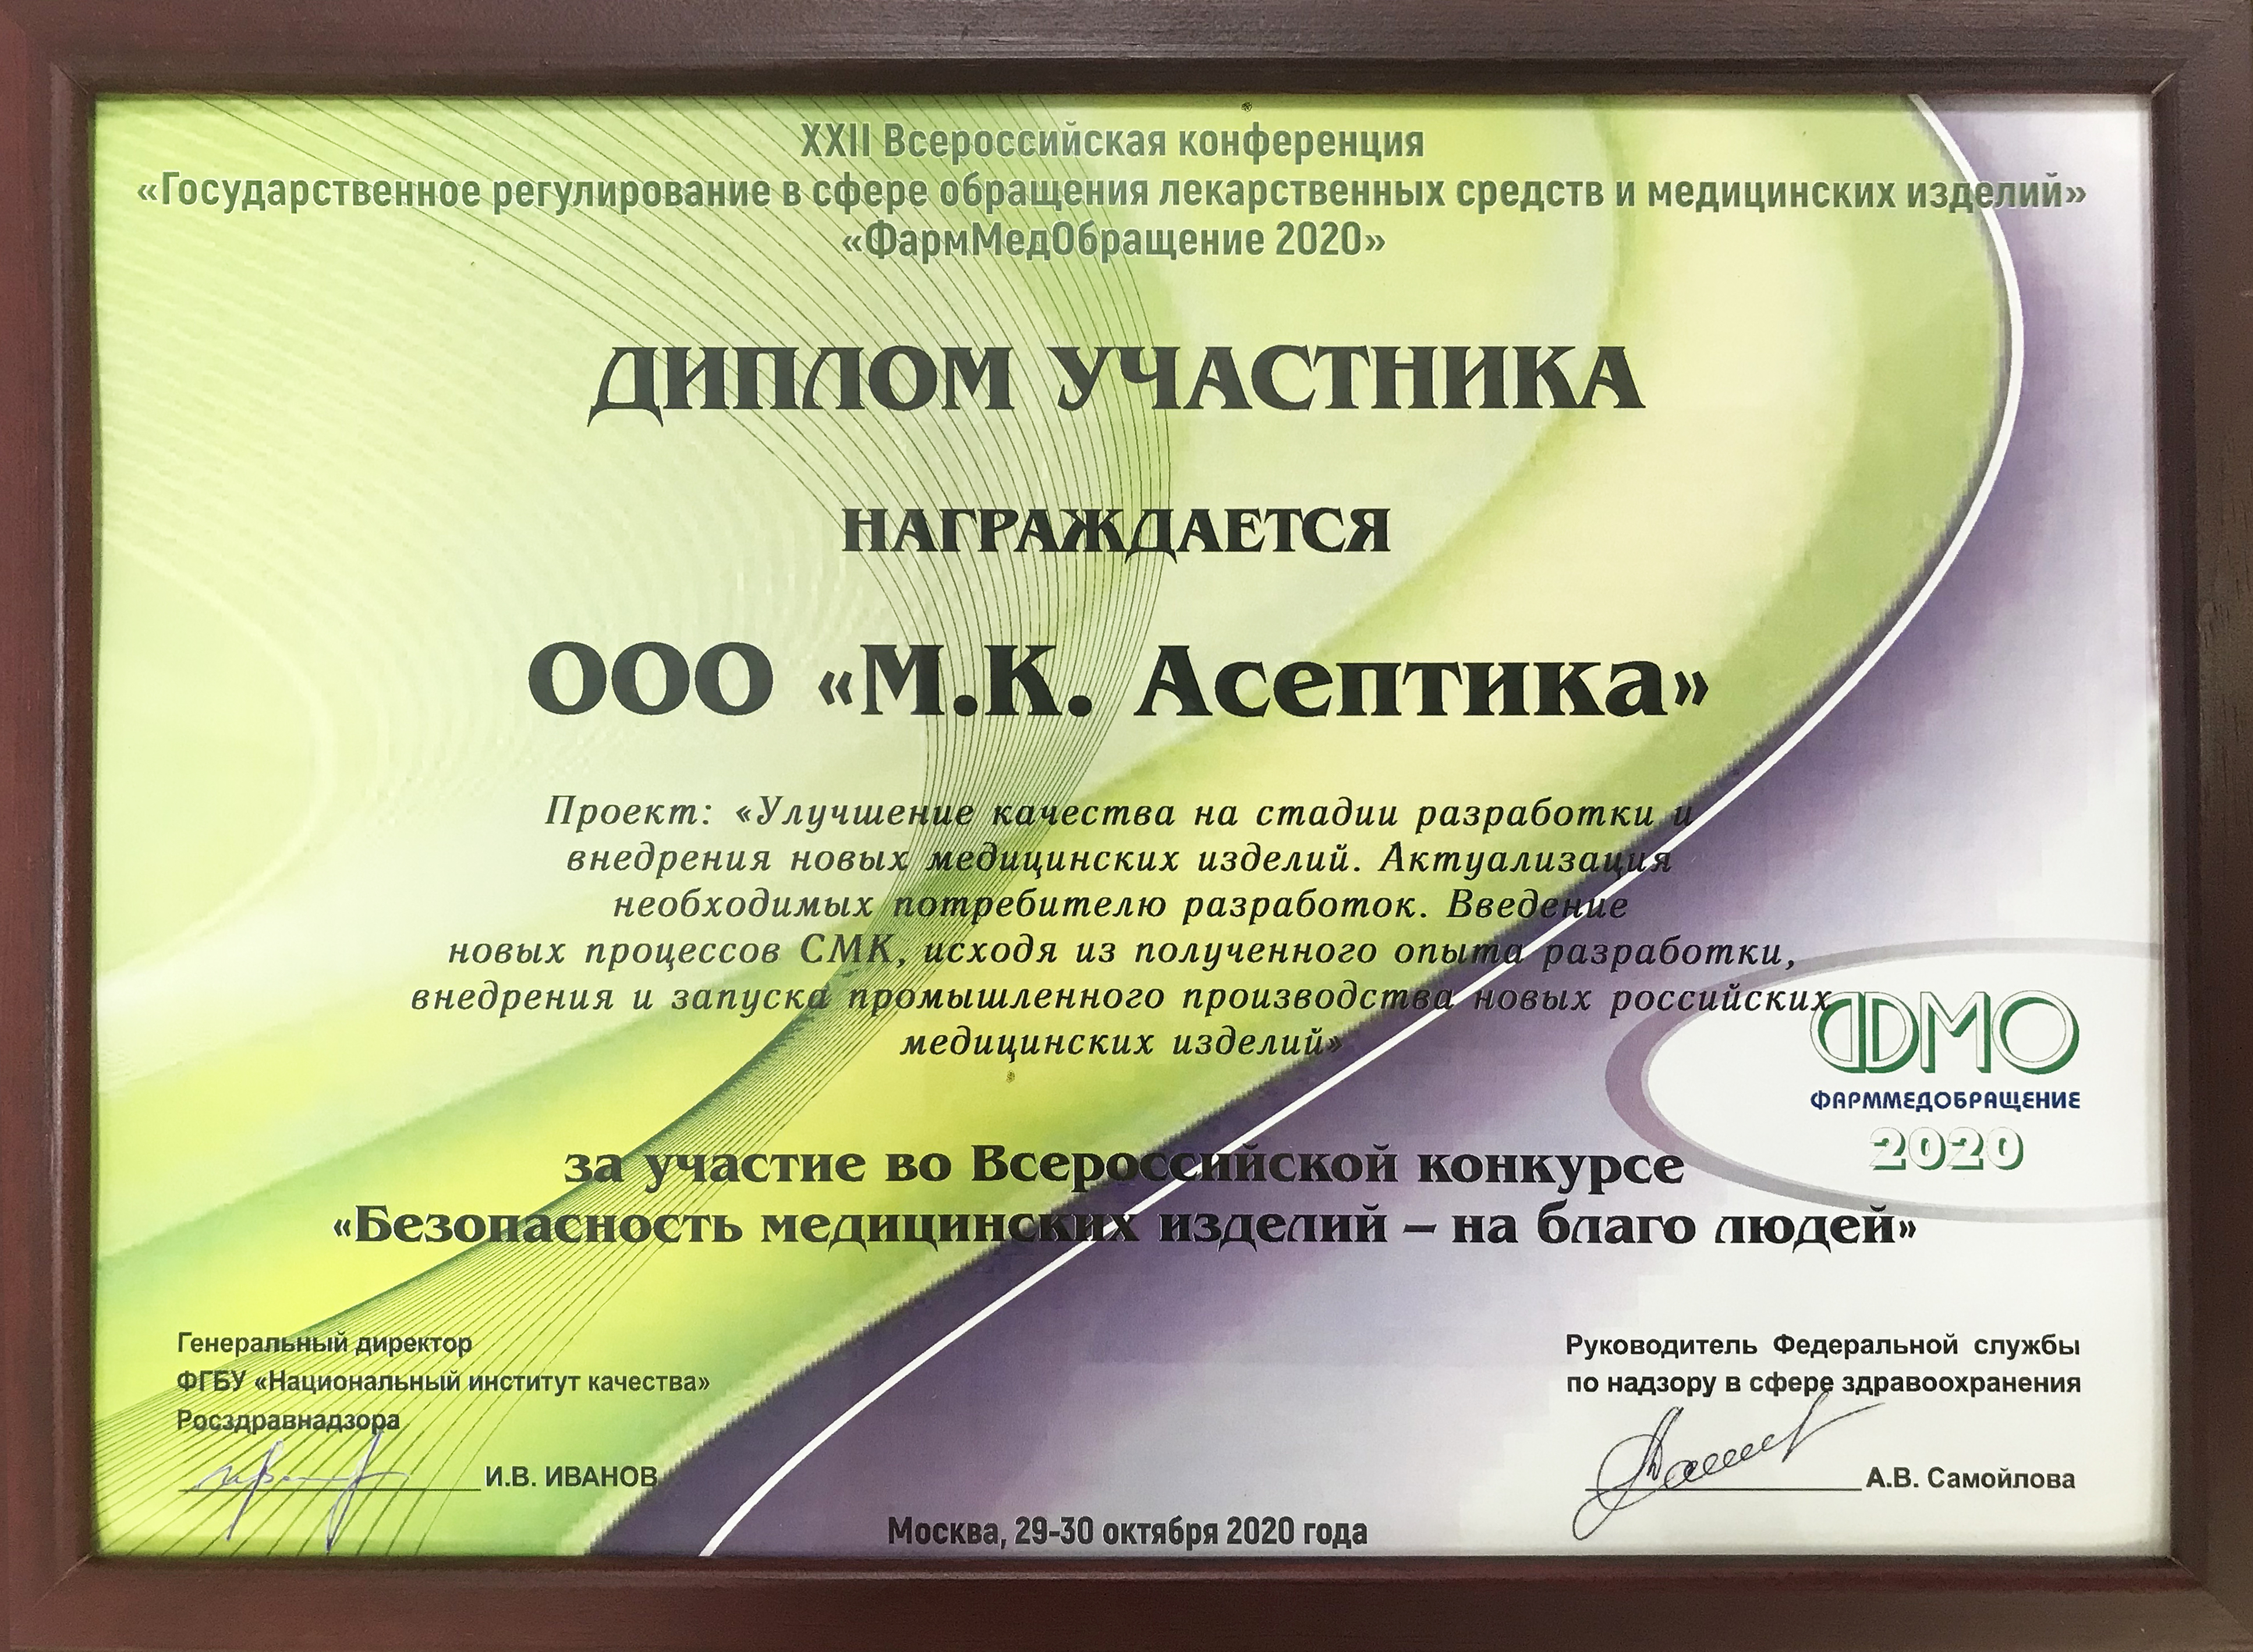 Diploma for participation in the "Safety of Medical Devices for the Sake of People" All-Russian Contest